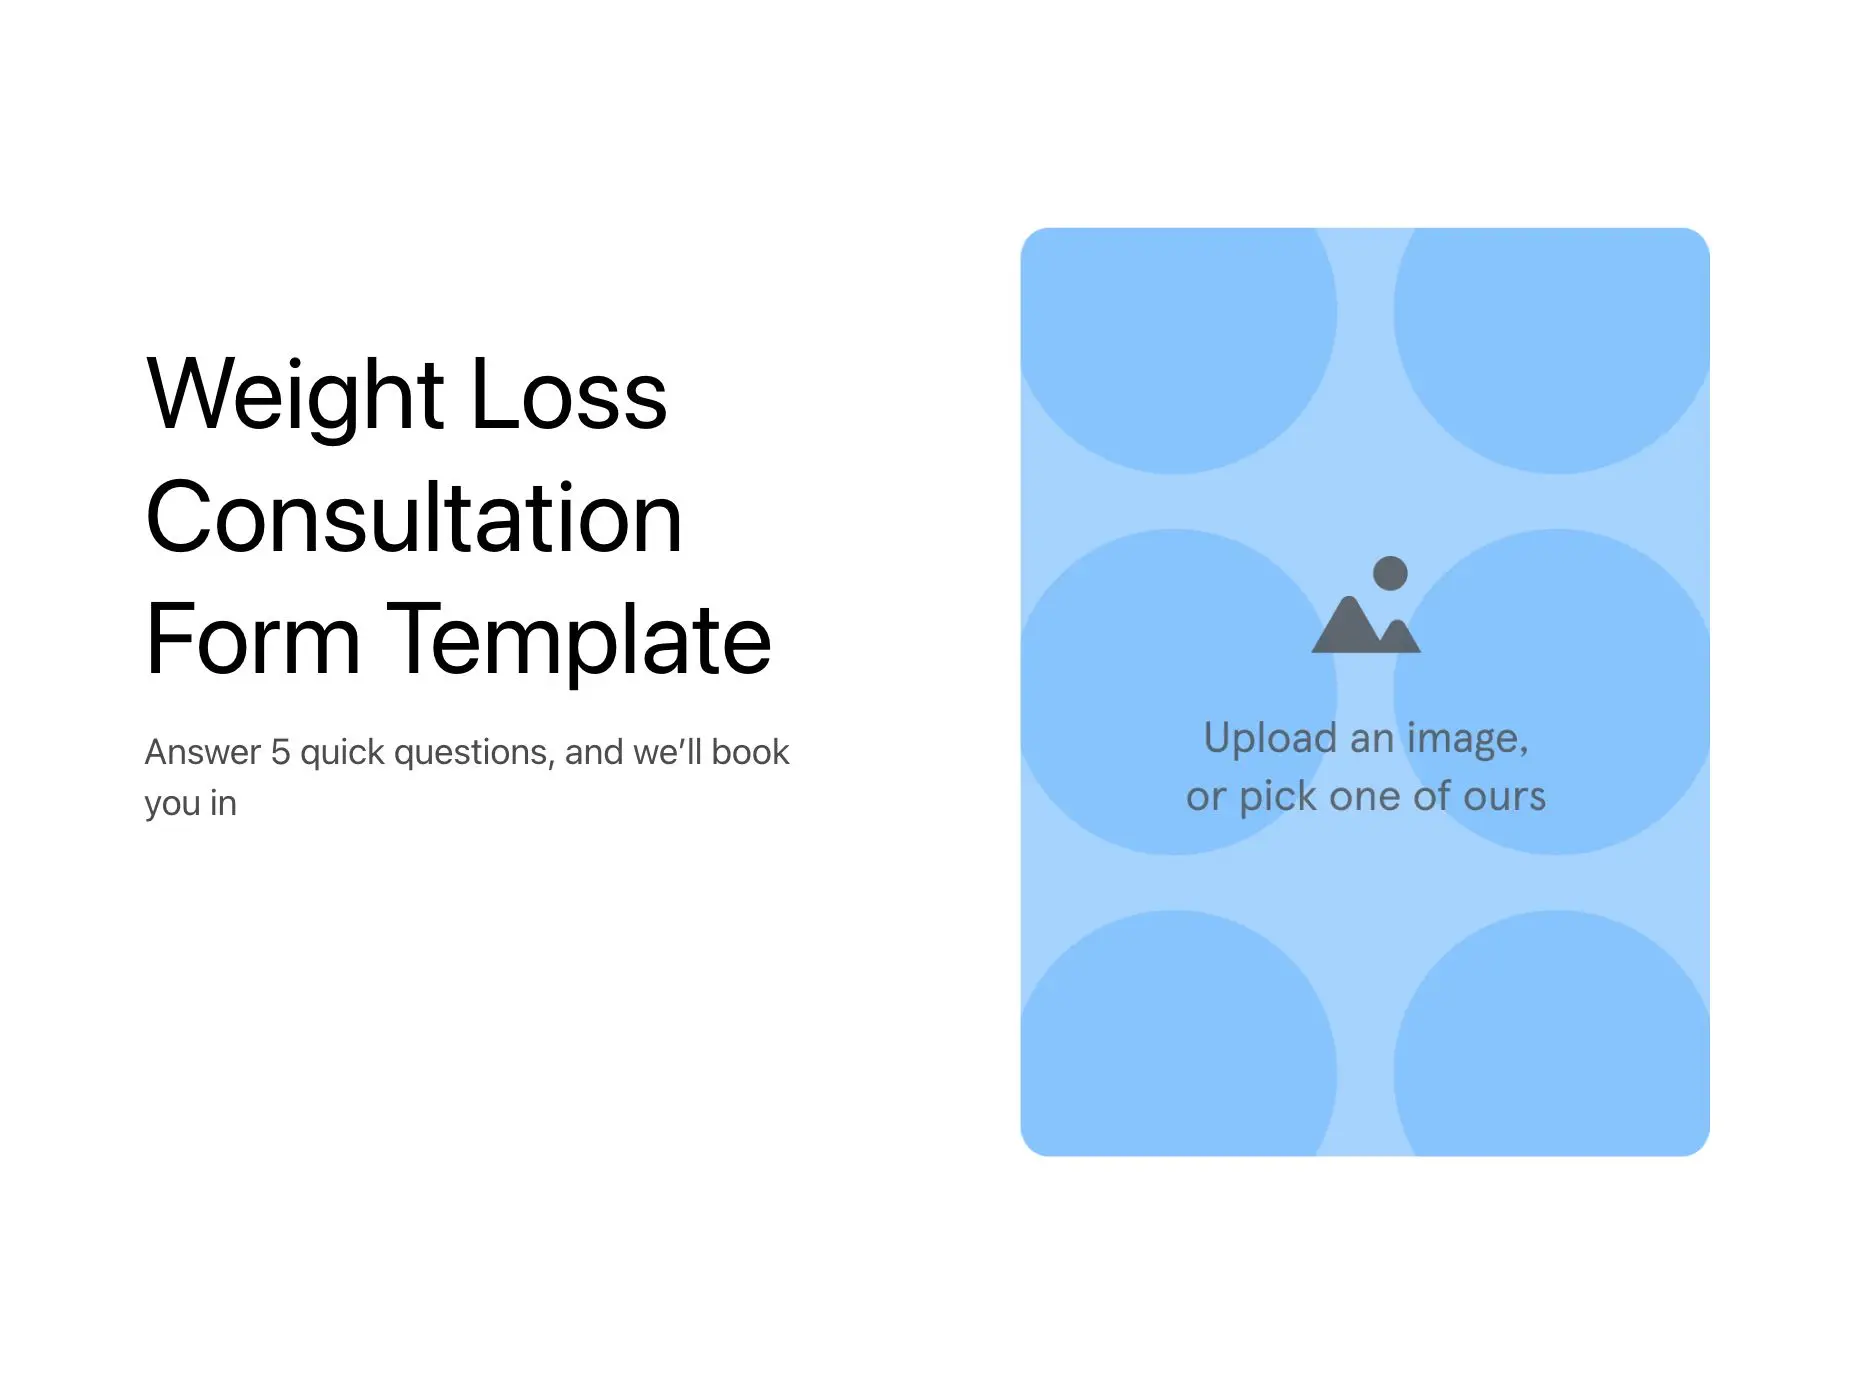 Weight Loss Consultation Form Template Hero